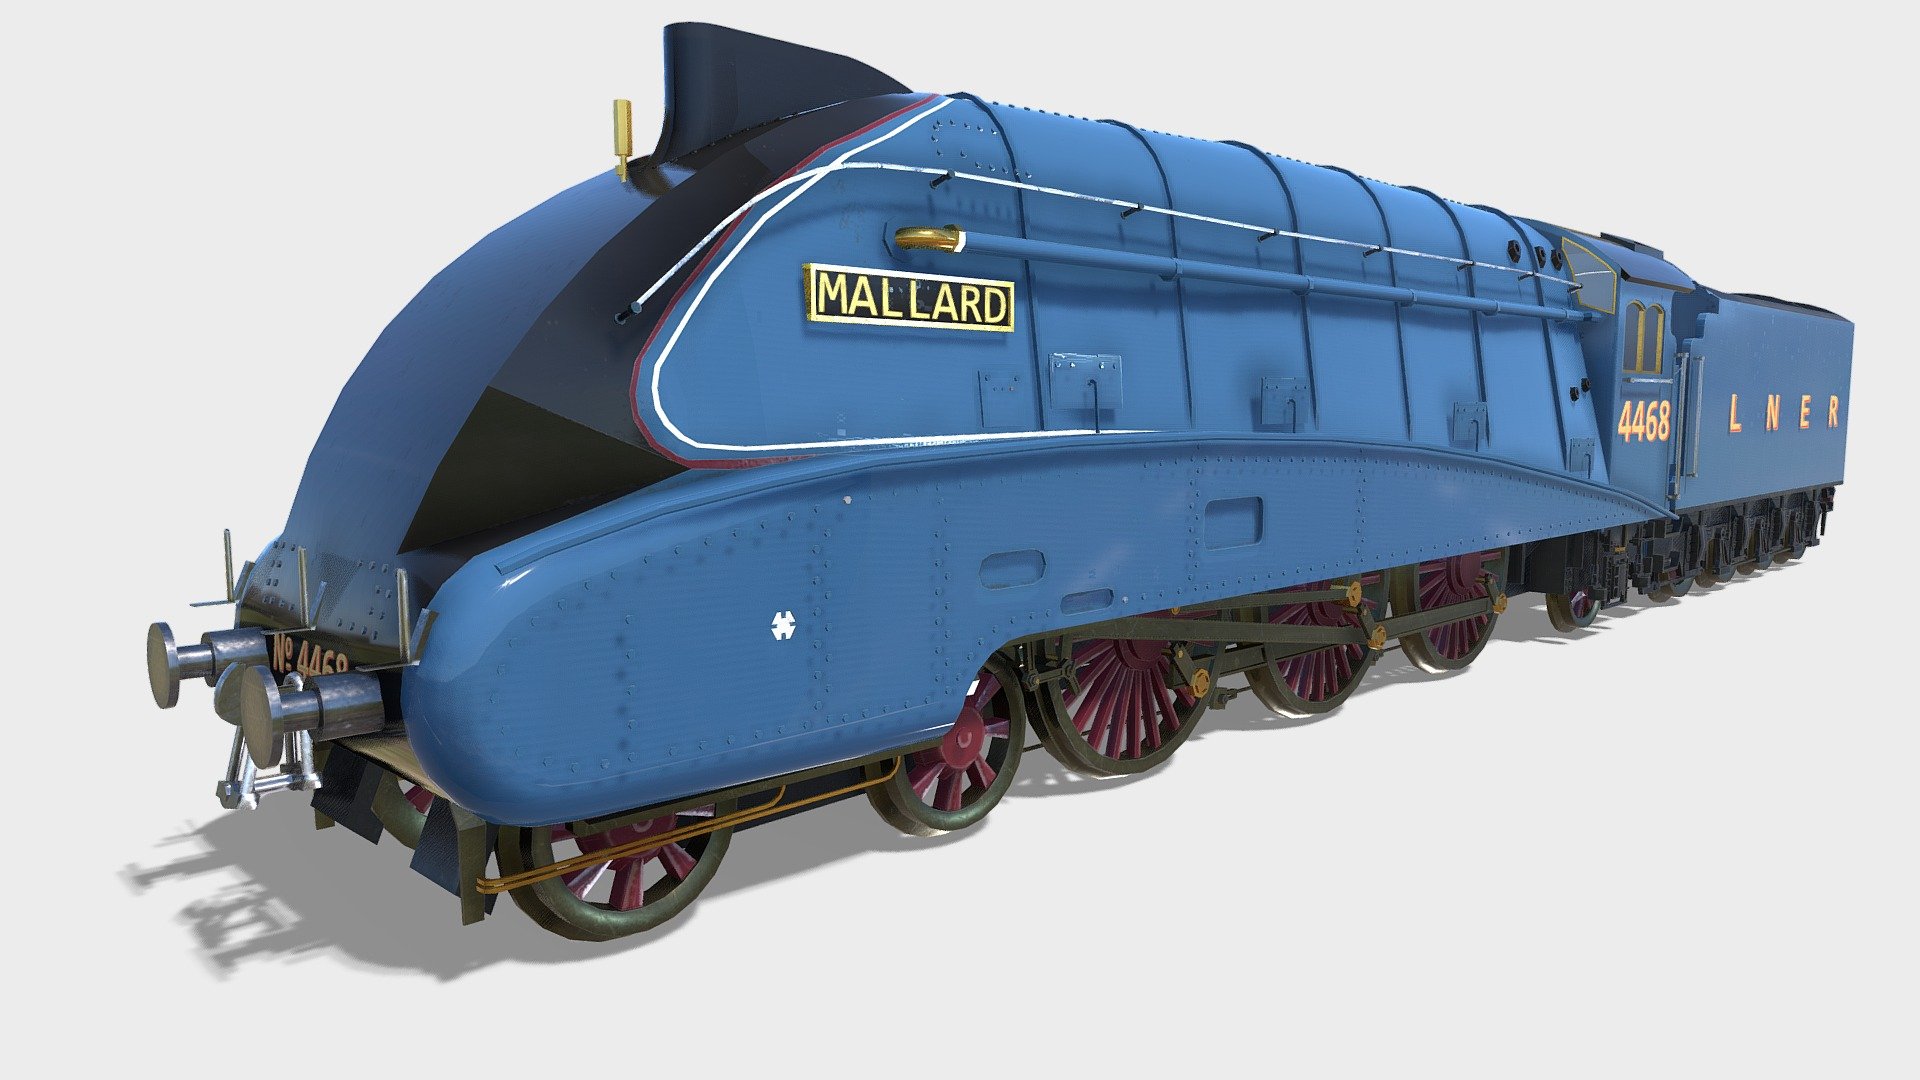 Detailed Description Info:

Model: Mallard Steam Train 
Media Type: 3D Model 
Geometry: Quads/Tris 
Polygon Count: 61718 
Vertice Count: 68649 
Textures: Yes 
Materials: Yes 
Rigged: No 
Animated: No 
UV Mapped: Yes 
Unwrapped UV's: Yes Non Overlapping

|||||||||||||||||||||||||||||||||||

Textures formats: PBR textures include specular, gloss diffuse and normal maps in 4K resolution - Mallard - Buy Royalty Free 3D model by studio lab (@leonlabyk) 3d model